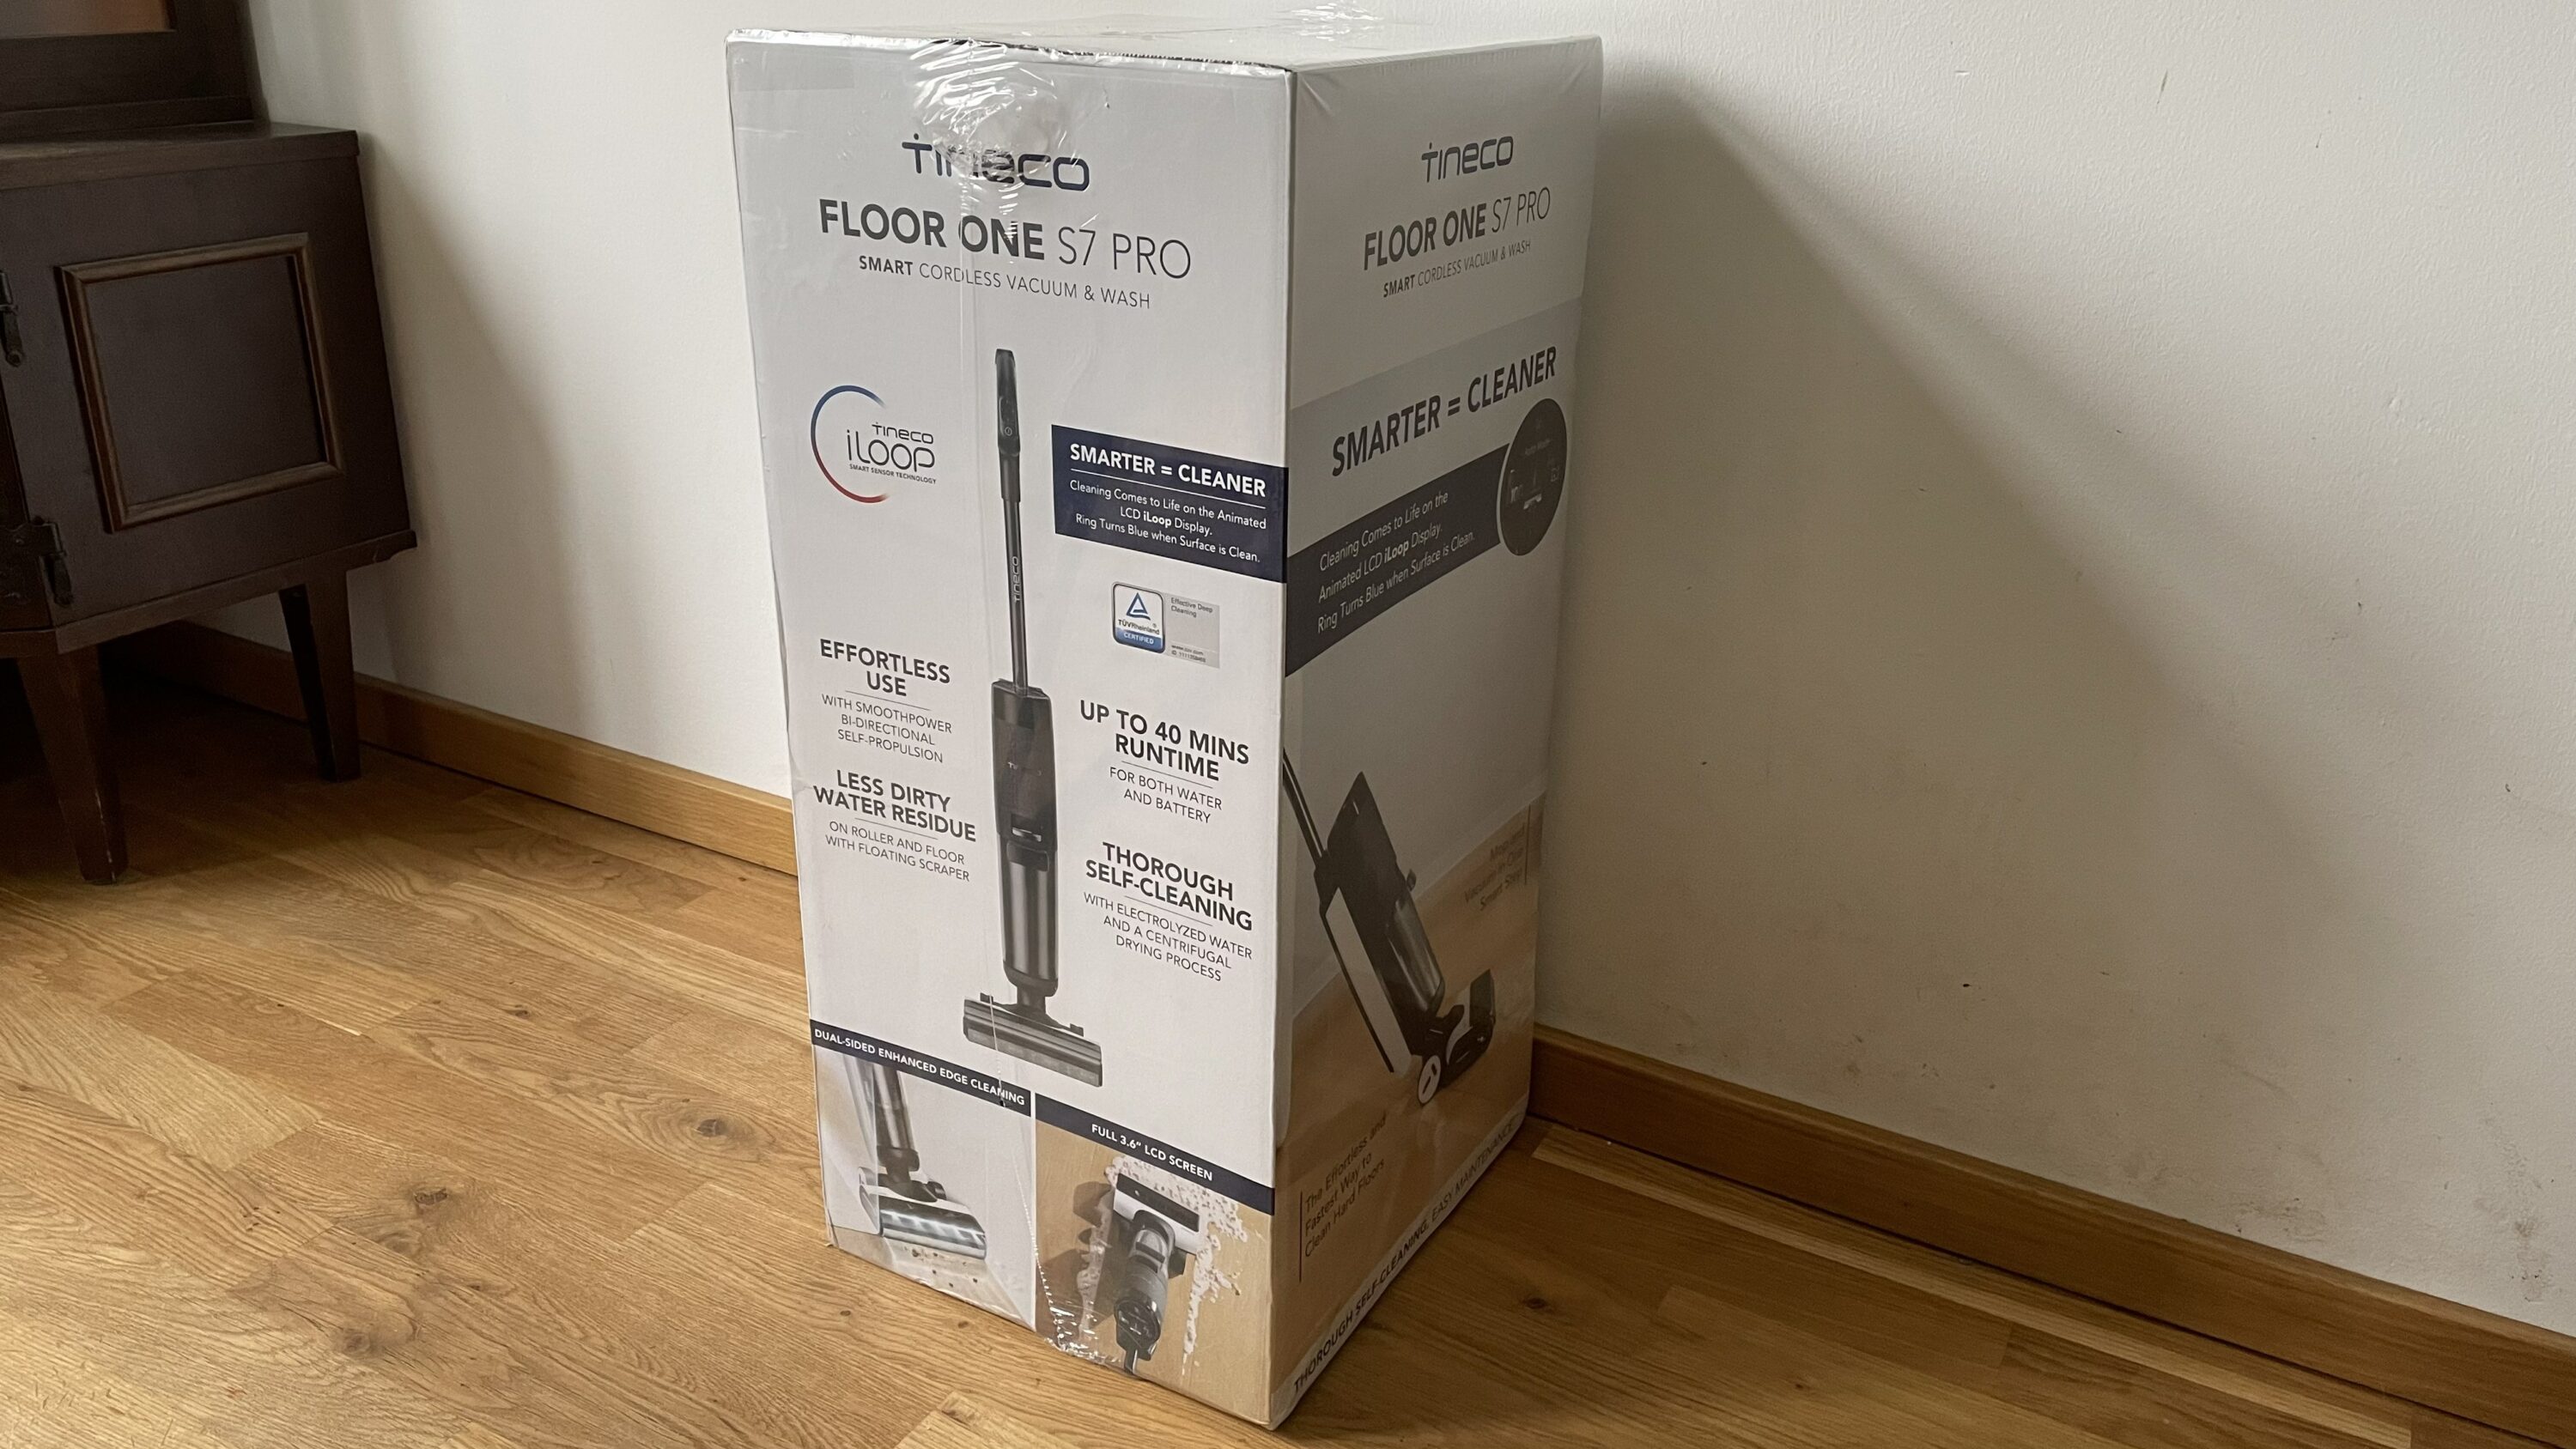 Tineco Floor One S7 Pro Test: The new reference?